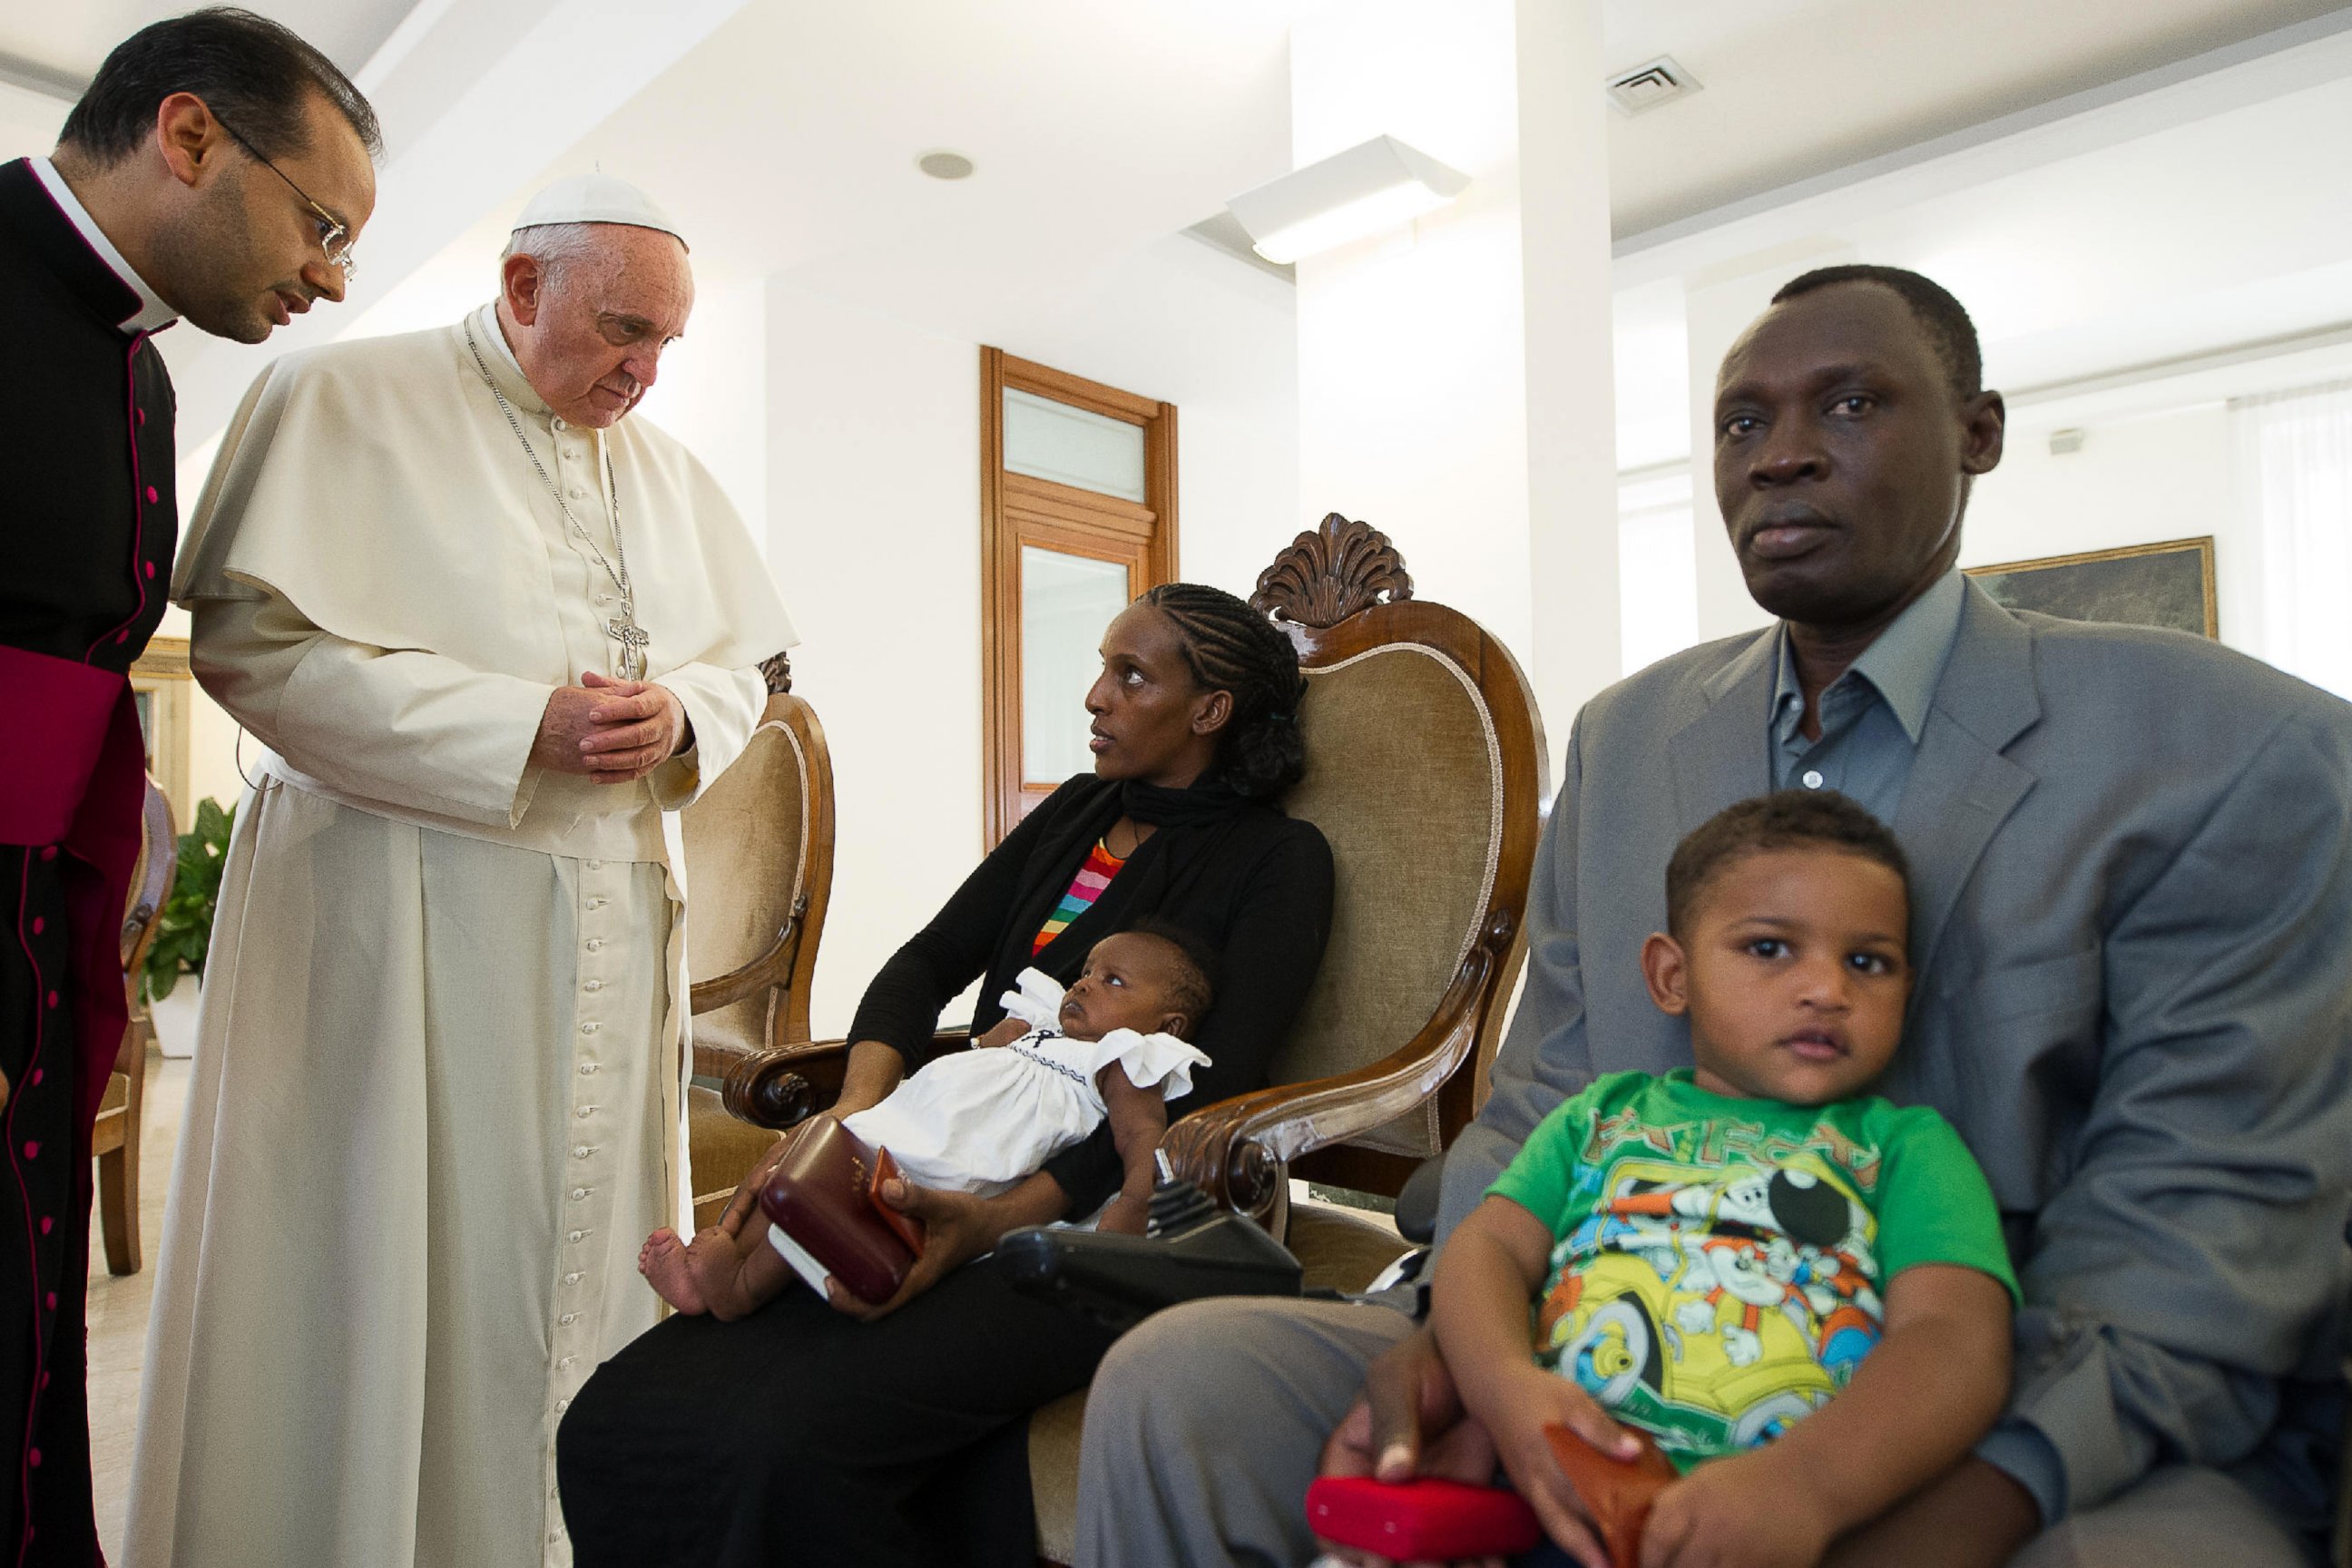 PHOTO: Pope Francis meets Meriam Ibrahim with her husband Daniel Wani and two small children in his Santa Marta residence at the Vatican on July 24, 2014.